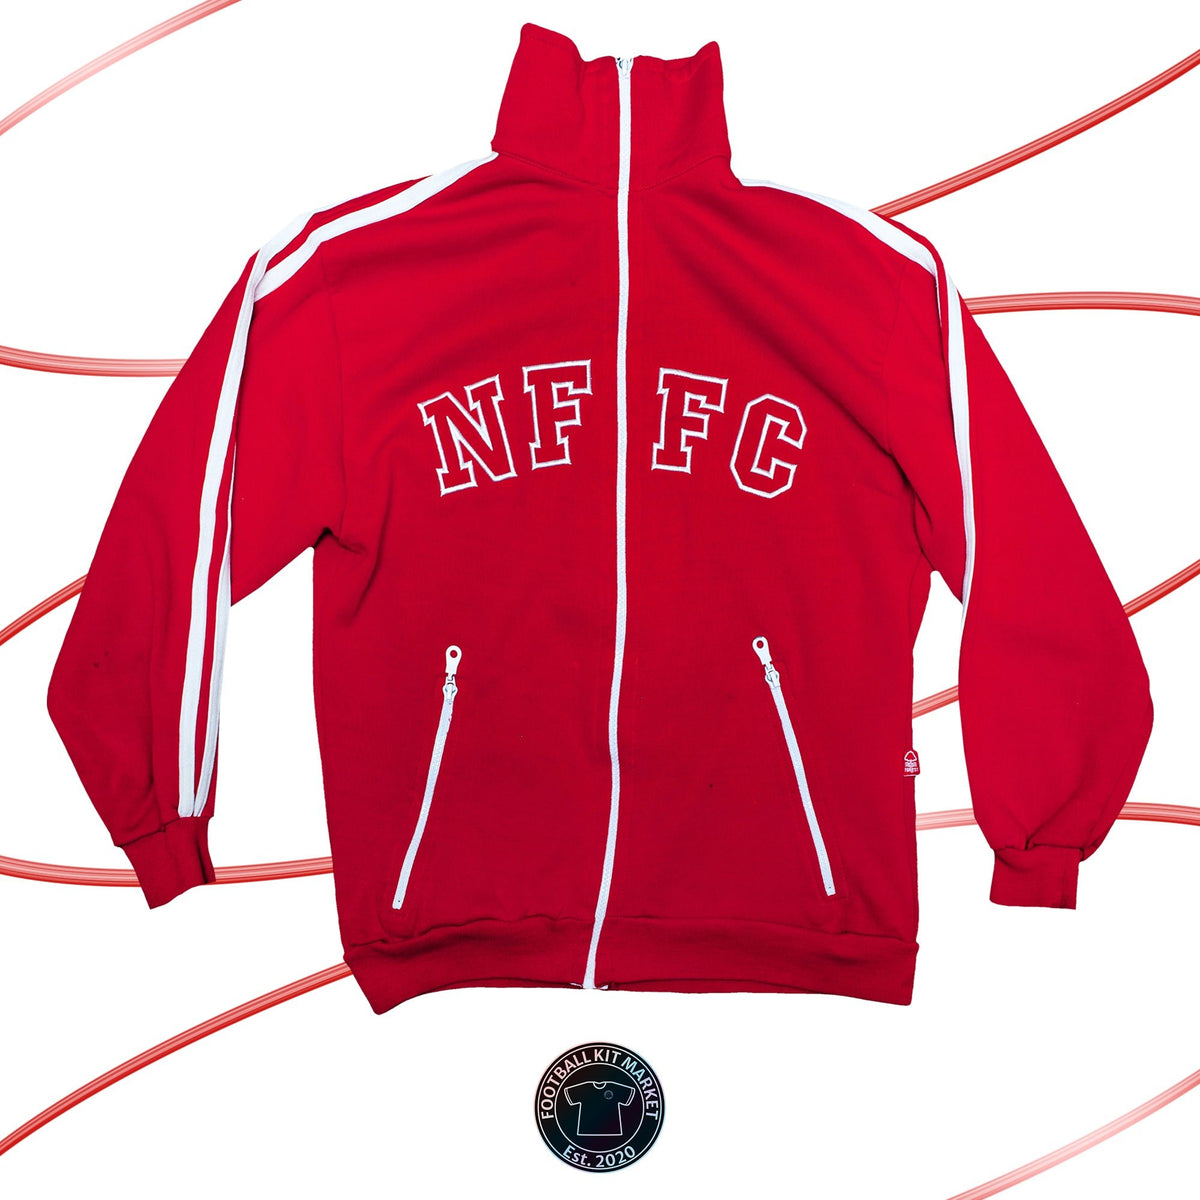 Genuine NOTTINGHAM FOREST Jacket - FOREST LEISUREWEAR (S) - Product Image from Football Kit Market